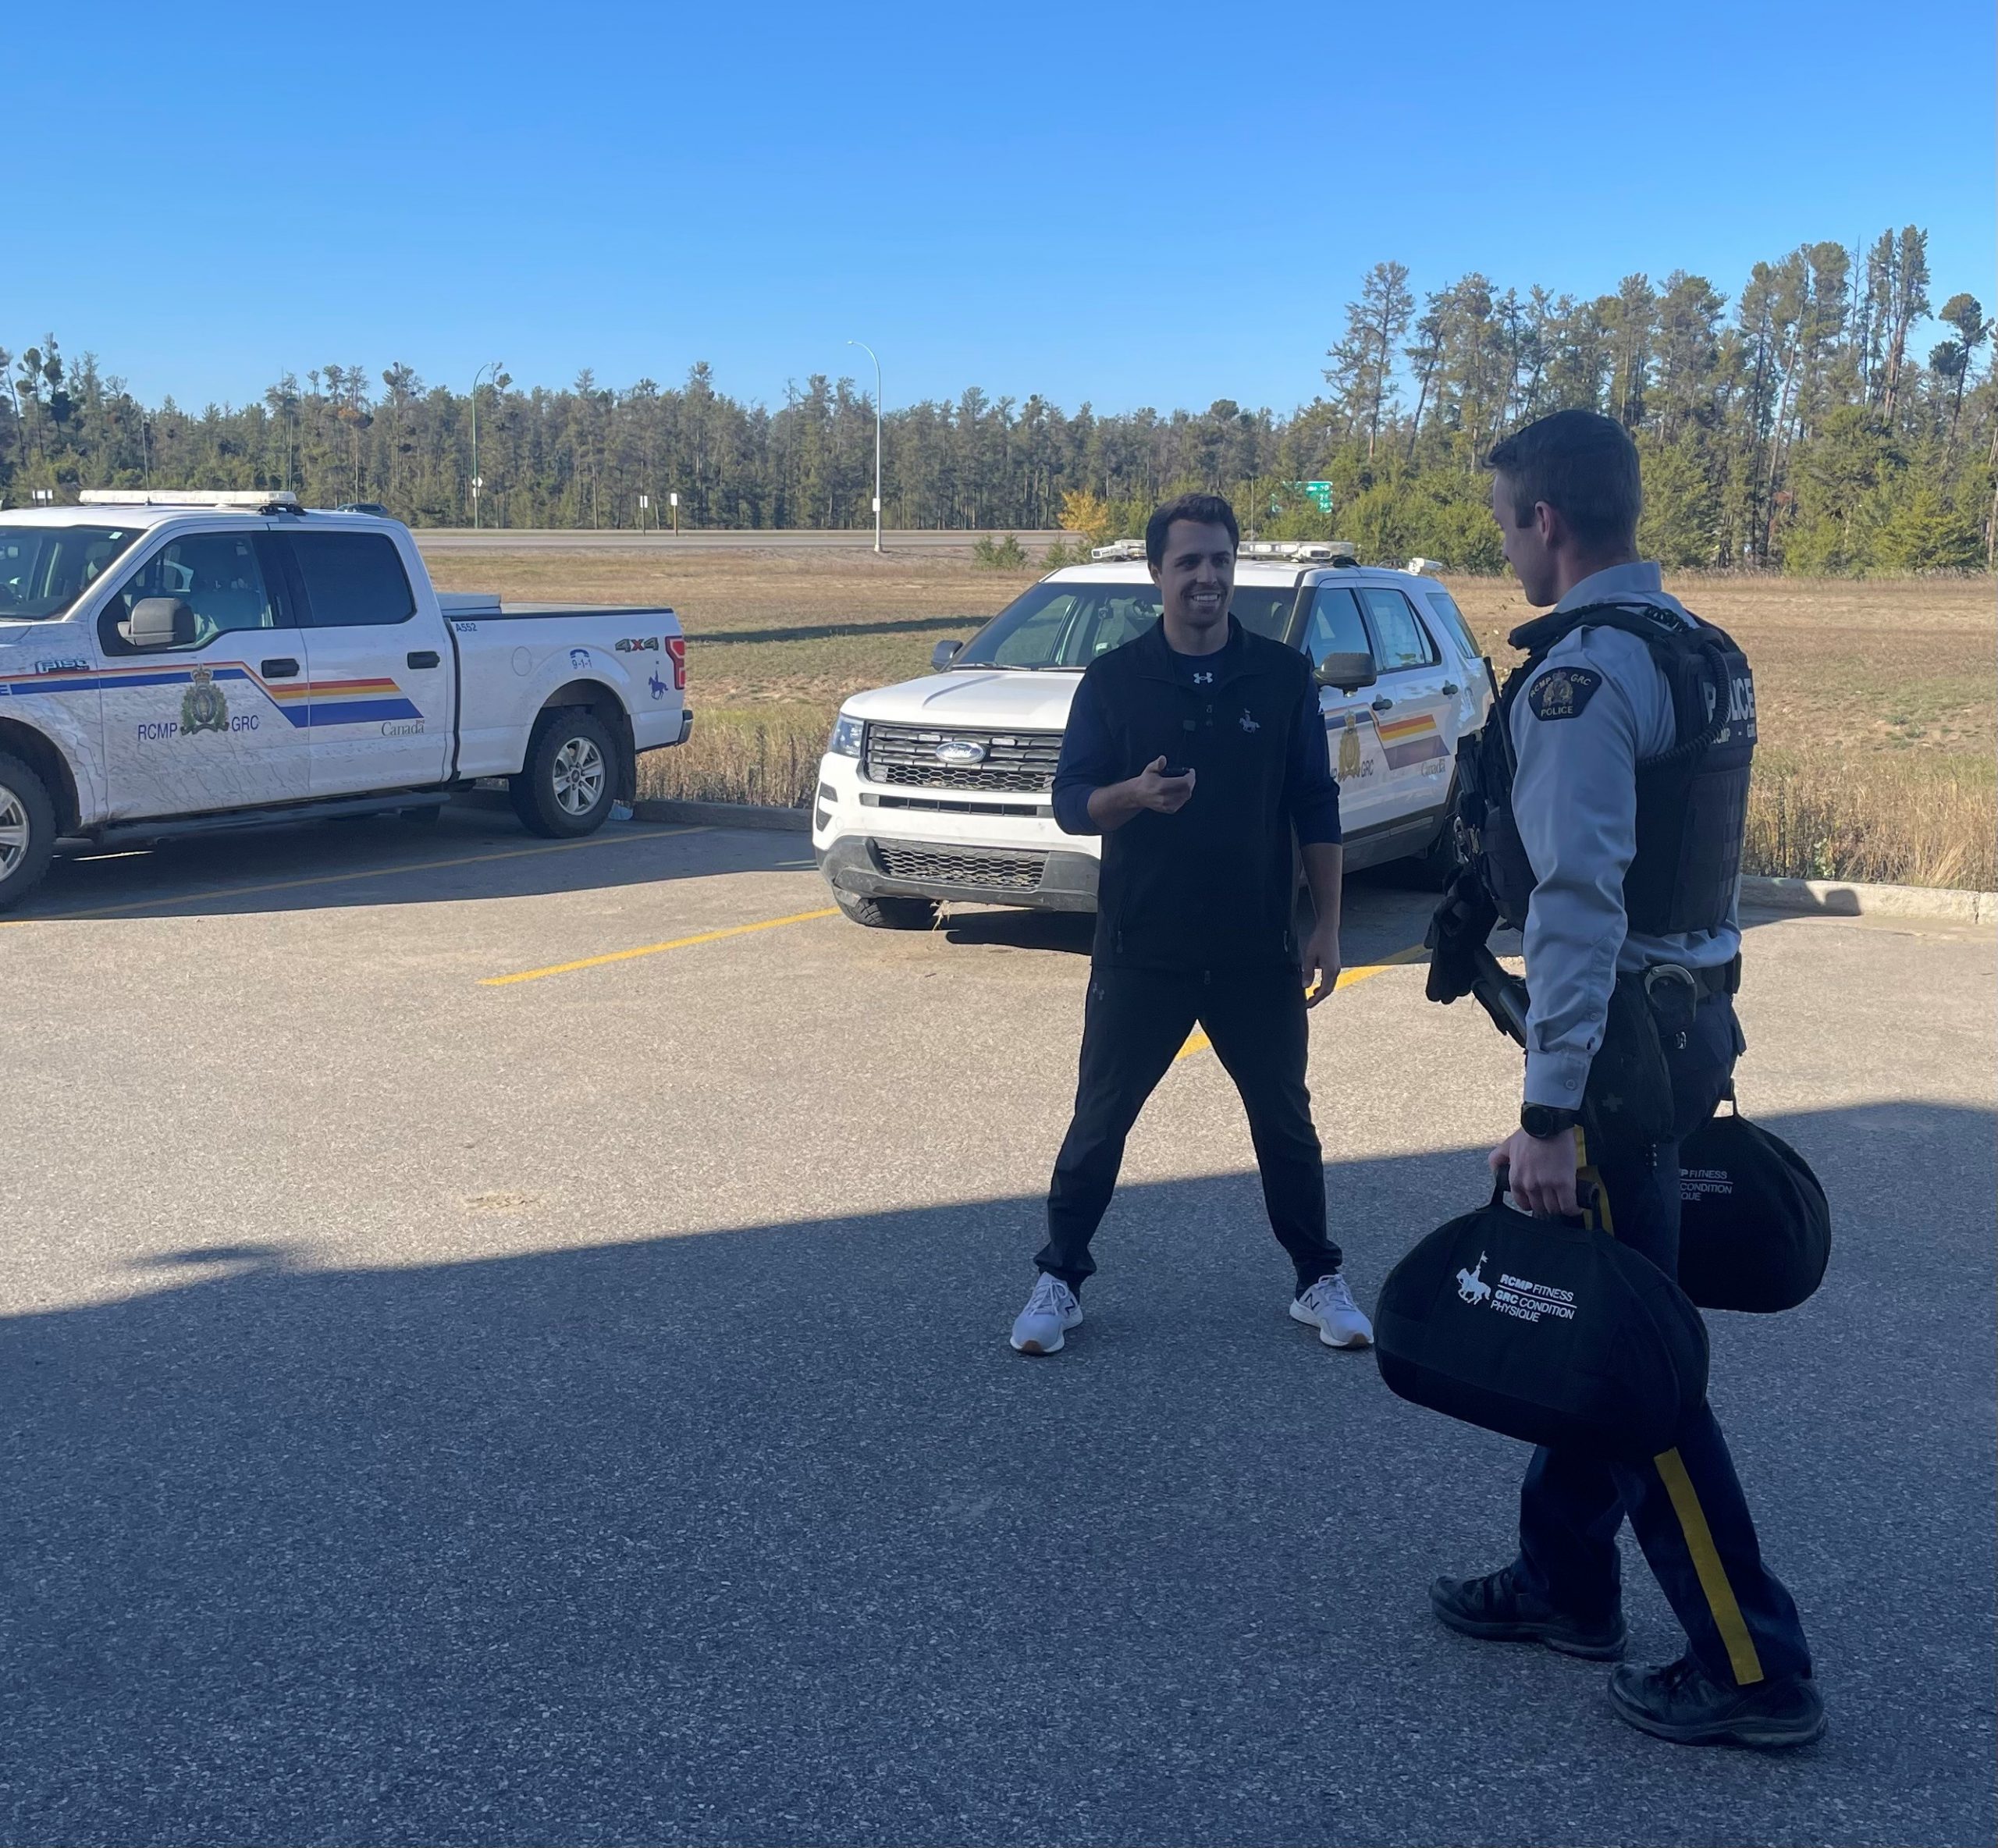 With 32 detachments in the north, and 16 satellite community detachments, Arndt’s territory is massive. He's pictured here in Prince Albert where he is based.